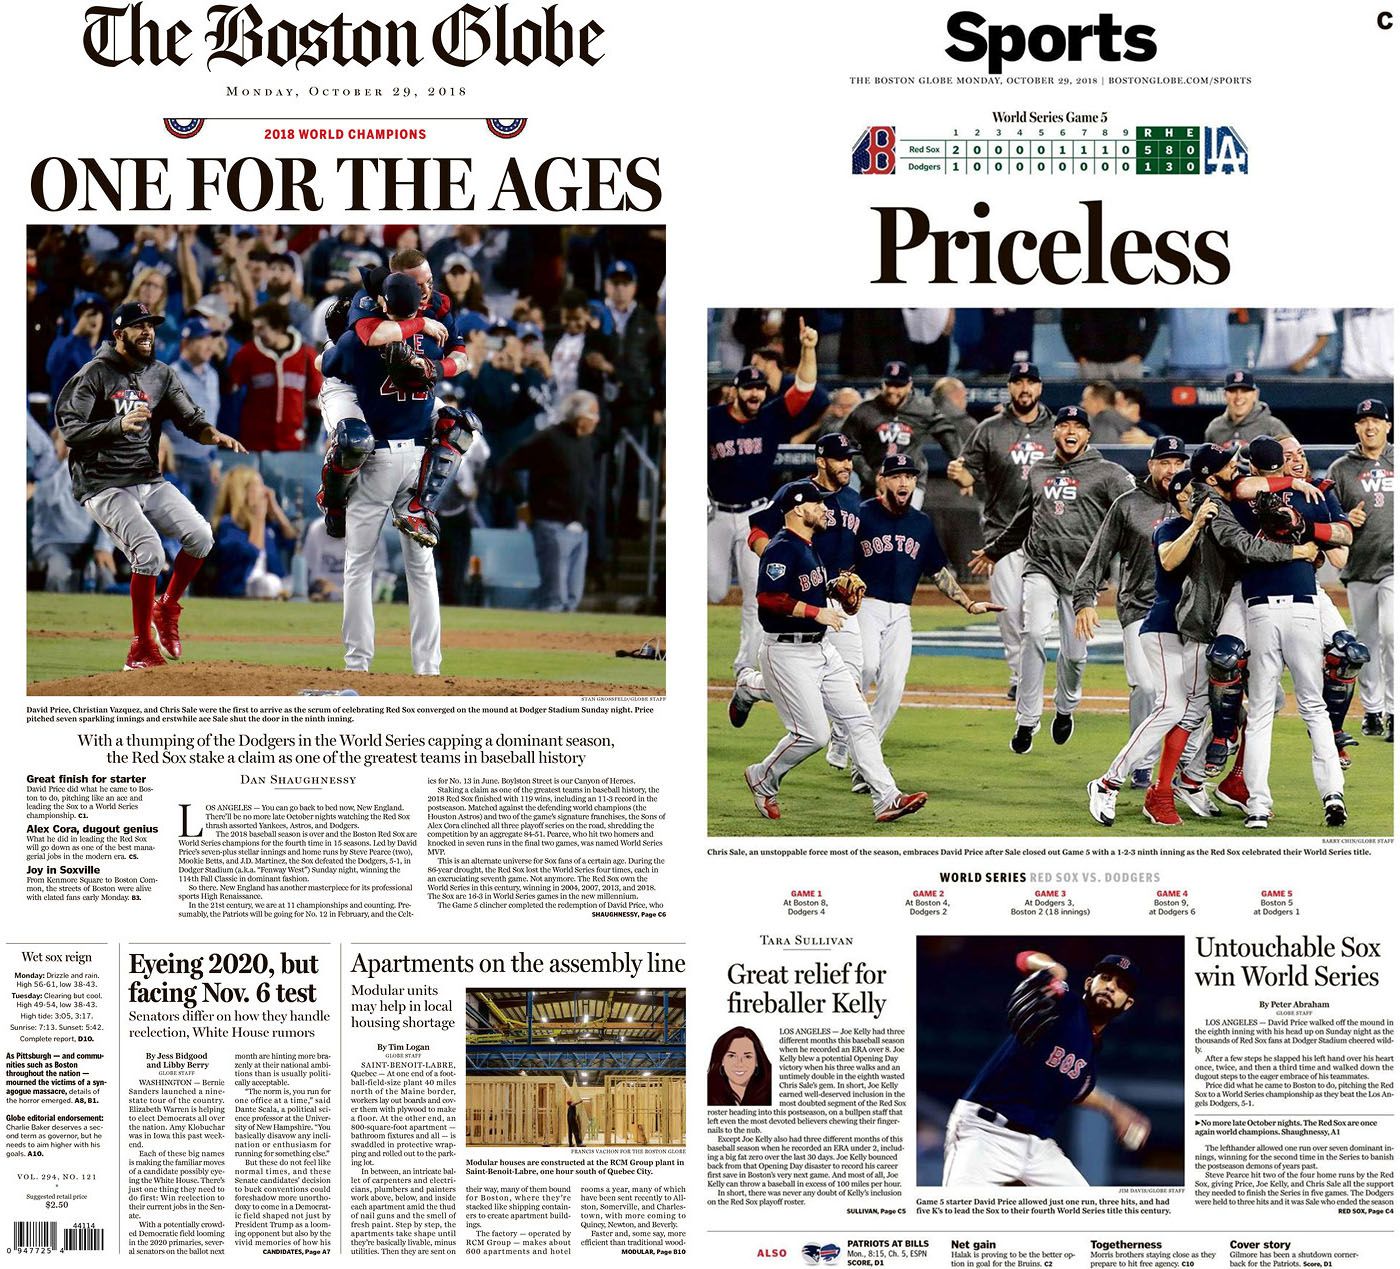 Viewers guide -- Red Sox take first step in historic 2004 ALCS